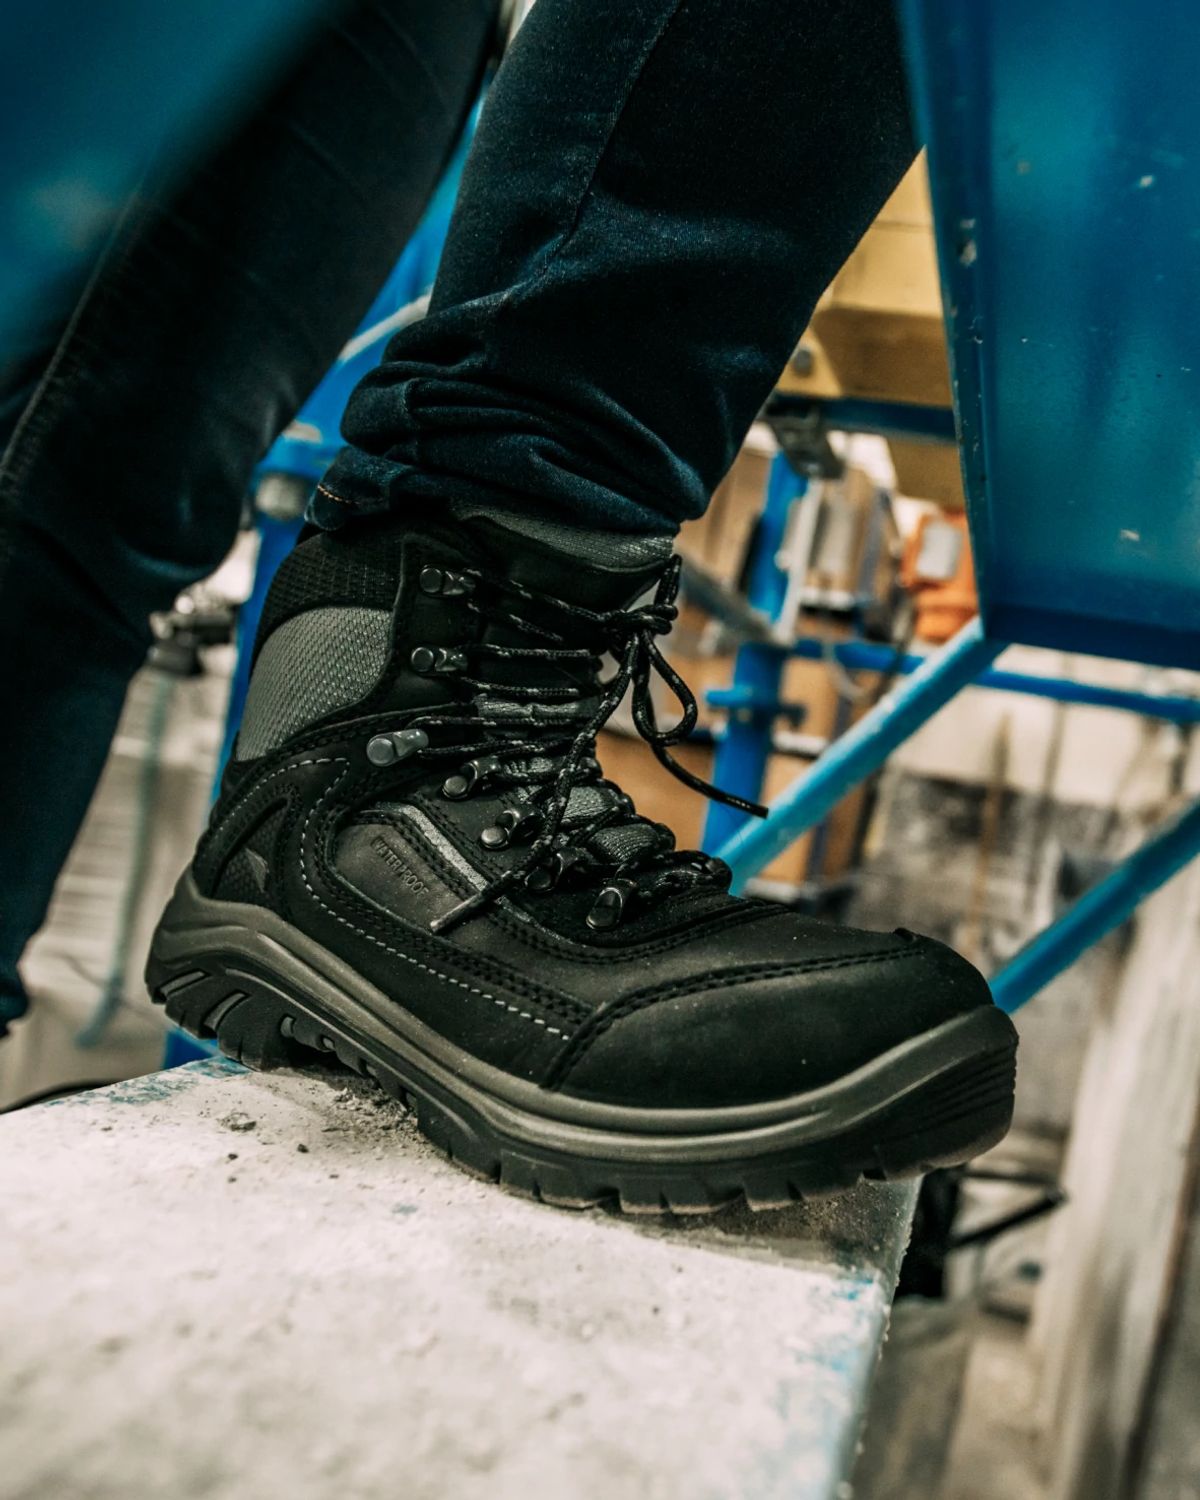 Tradeswoman | Red Wing